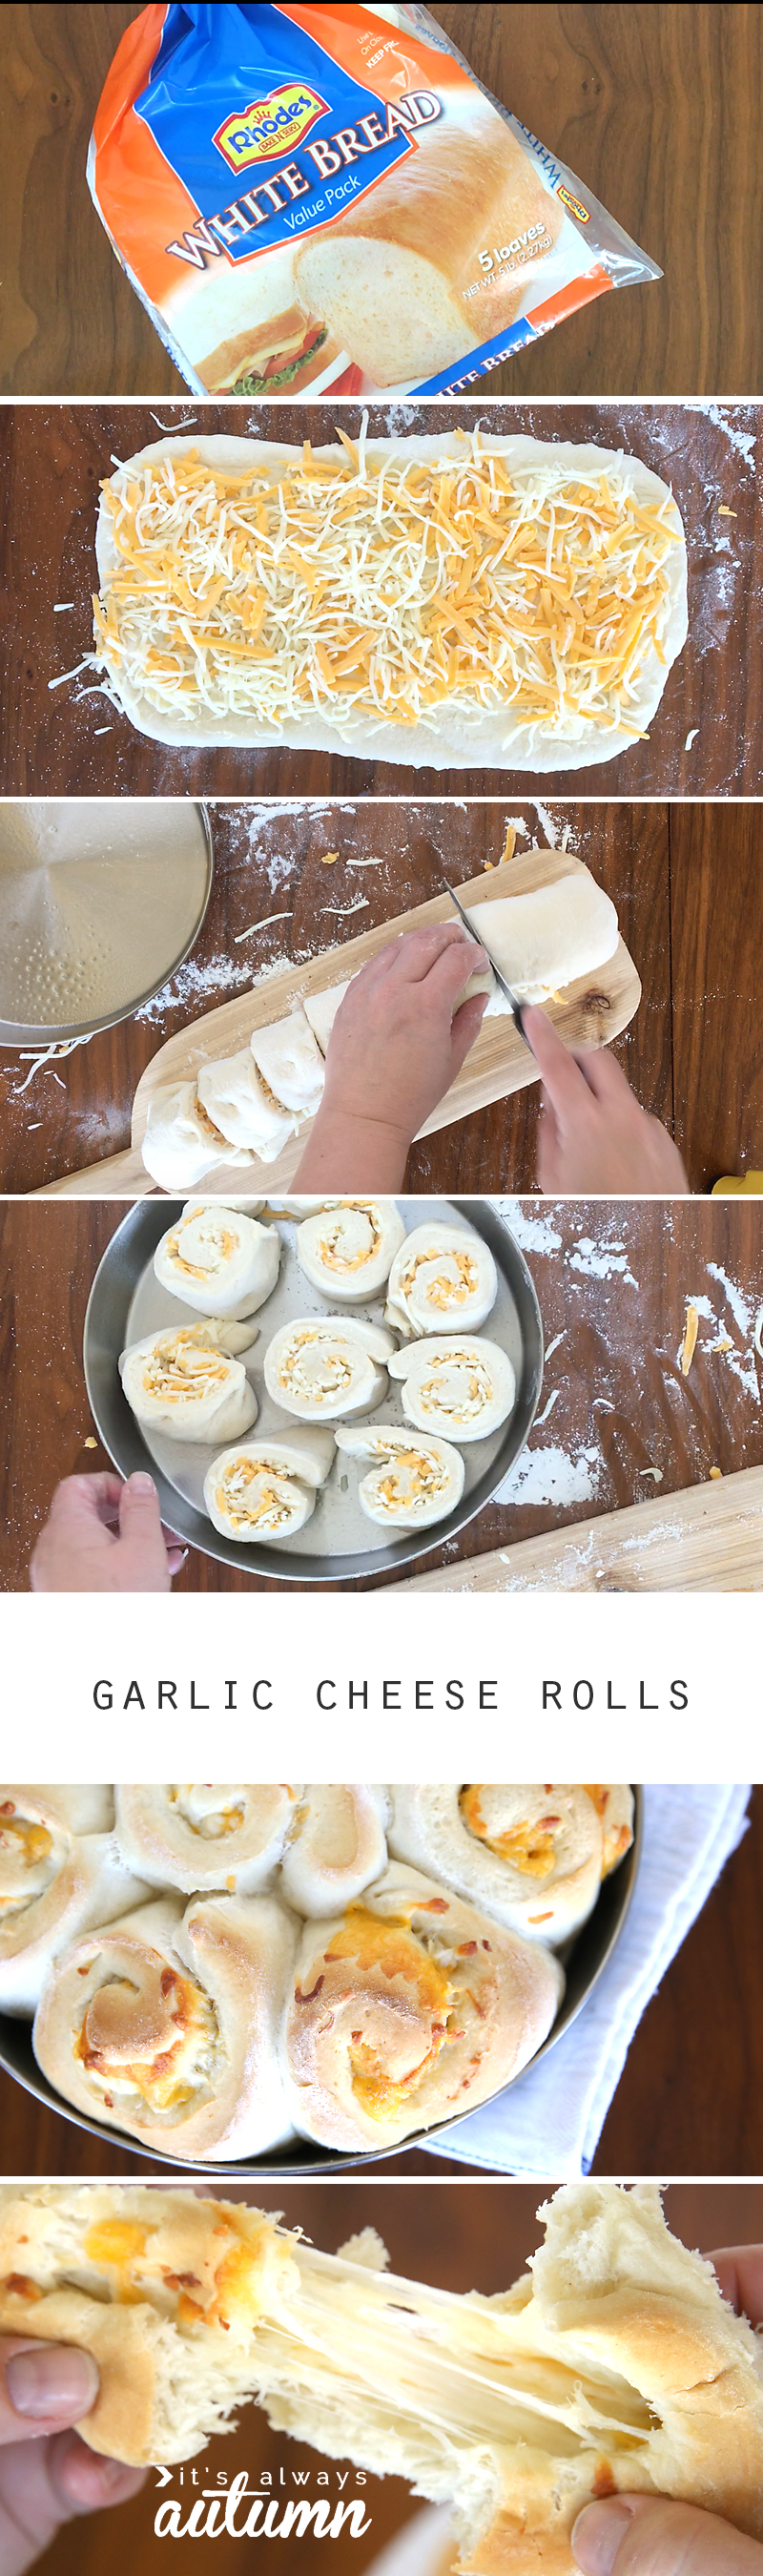 steps for making garlic cheese rolls